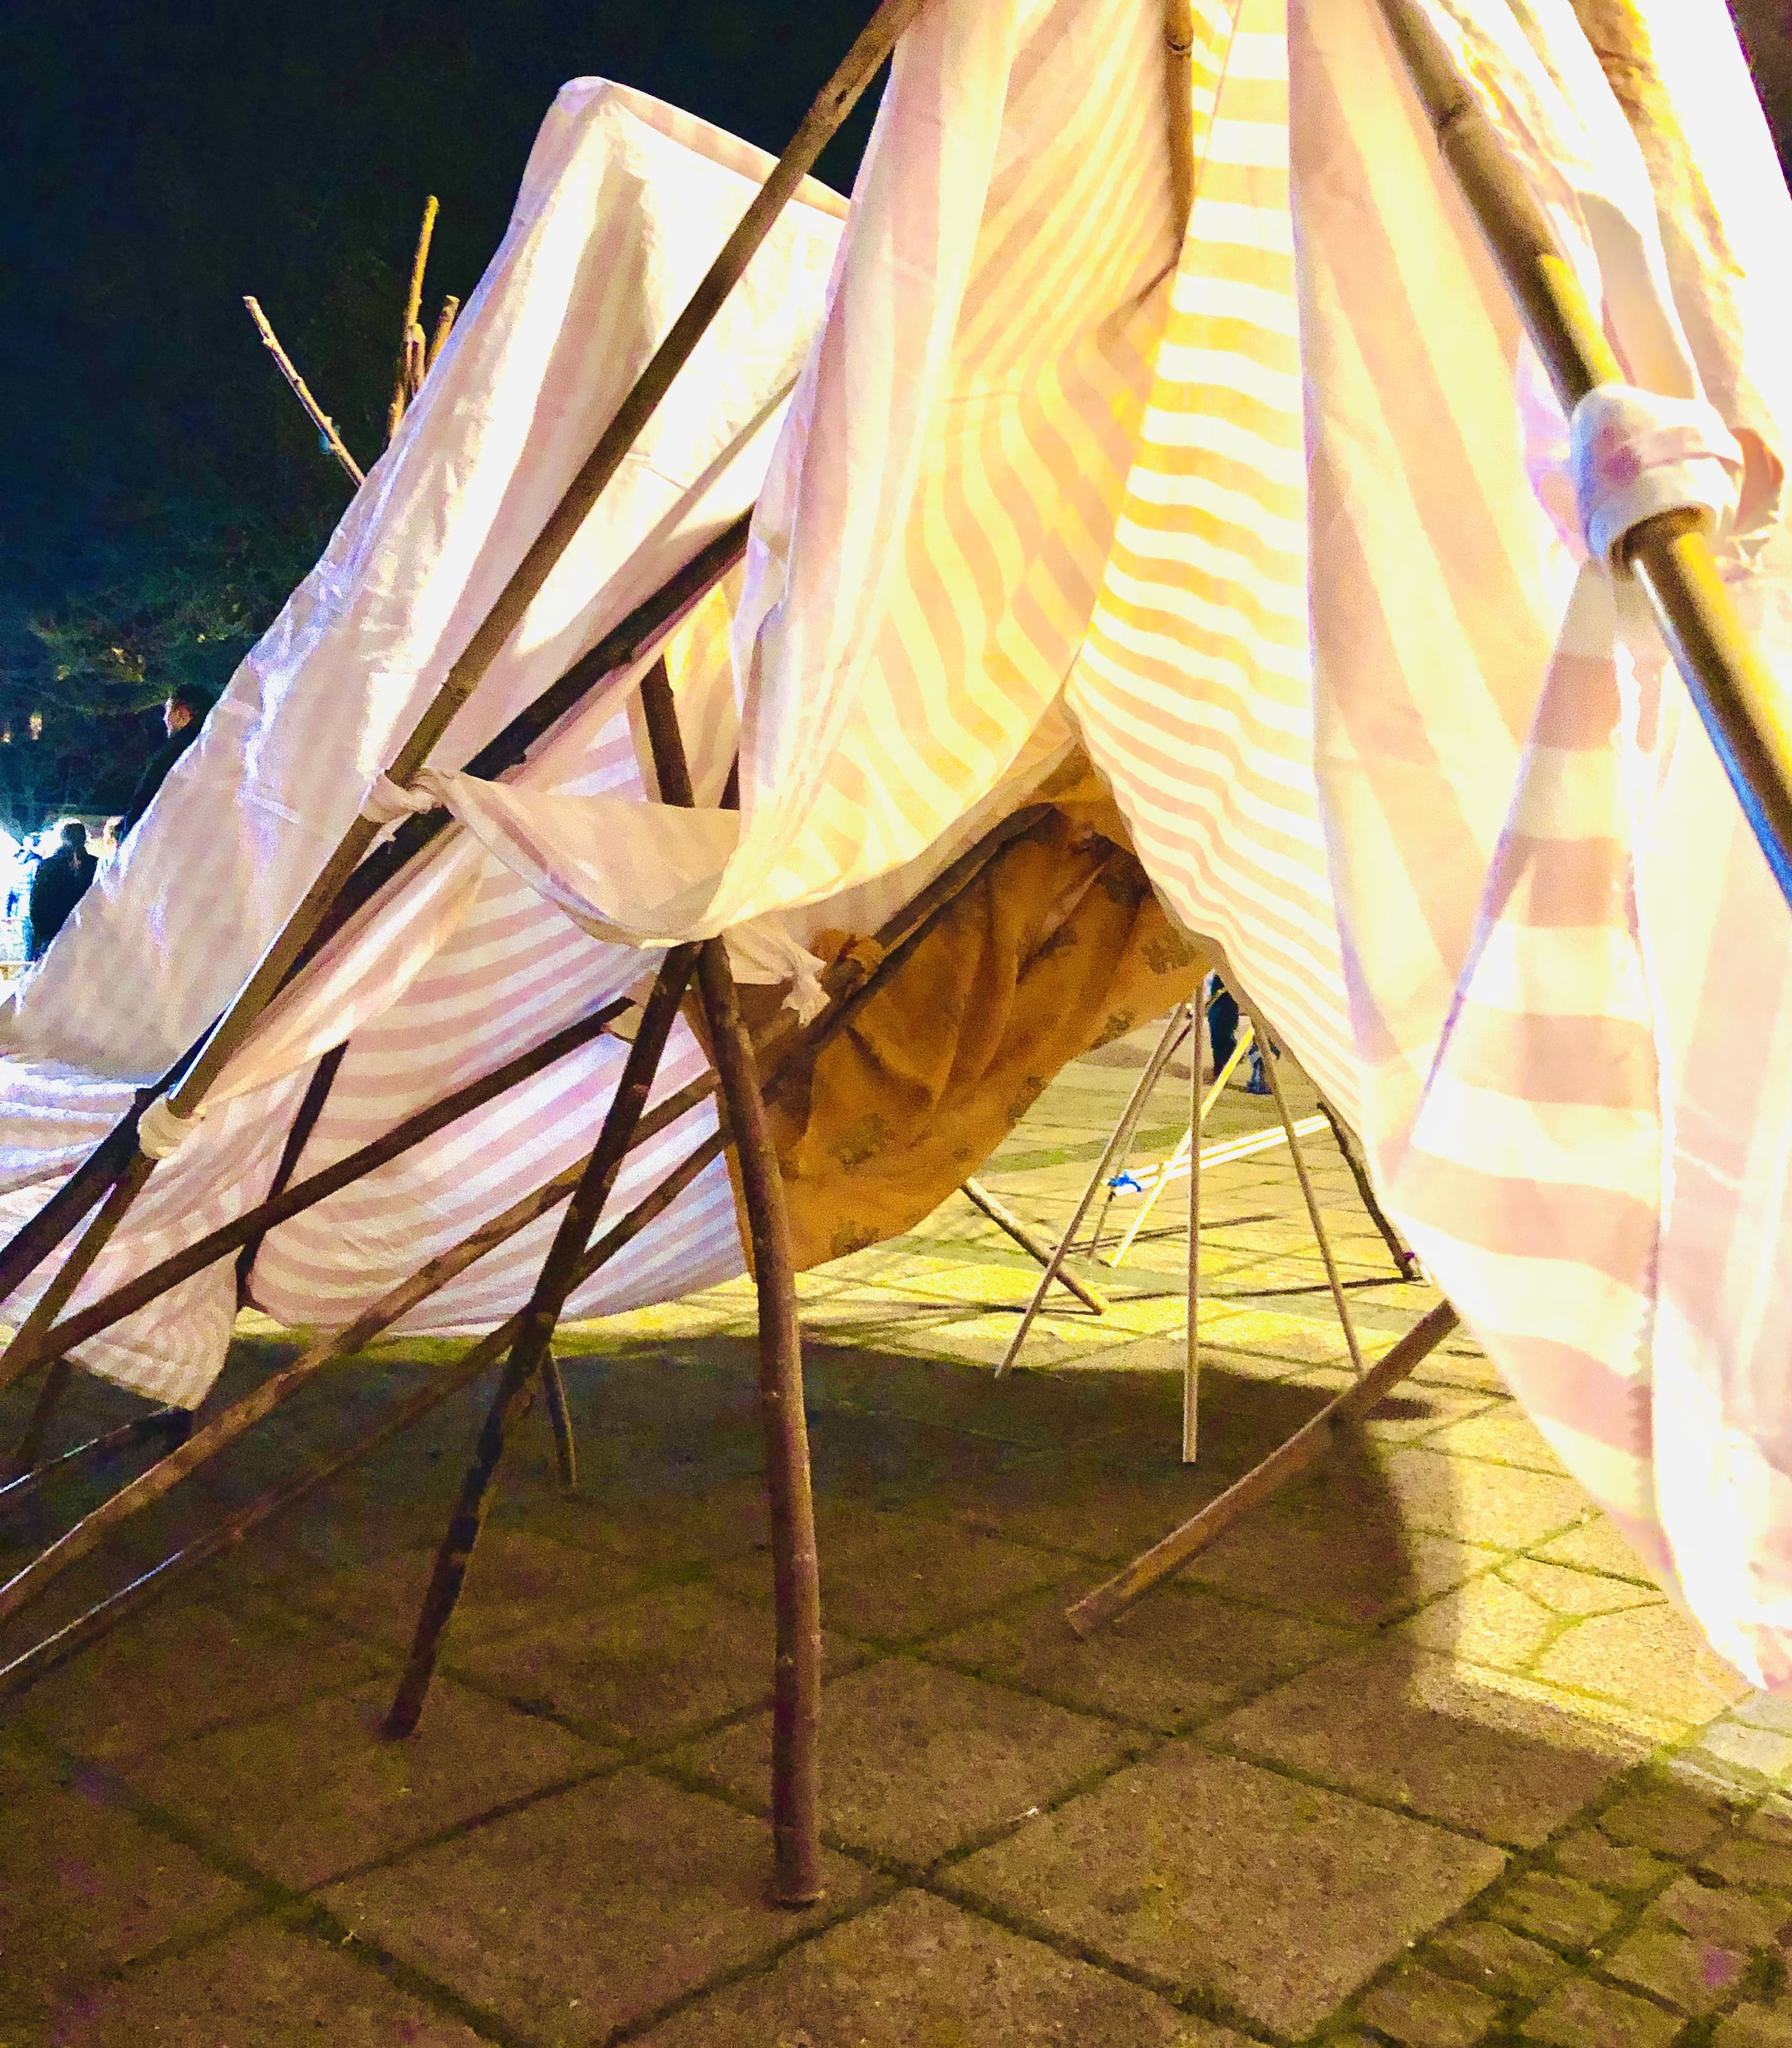 Simple tents built from wooden sticks and fabric. One is yellow and one is pink.